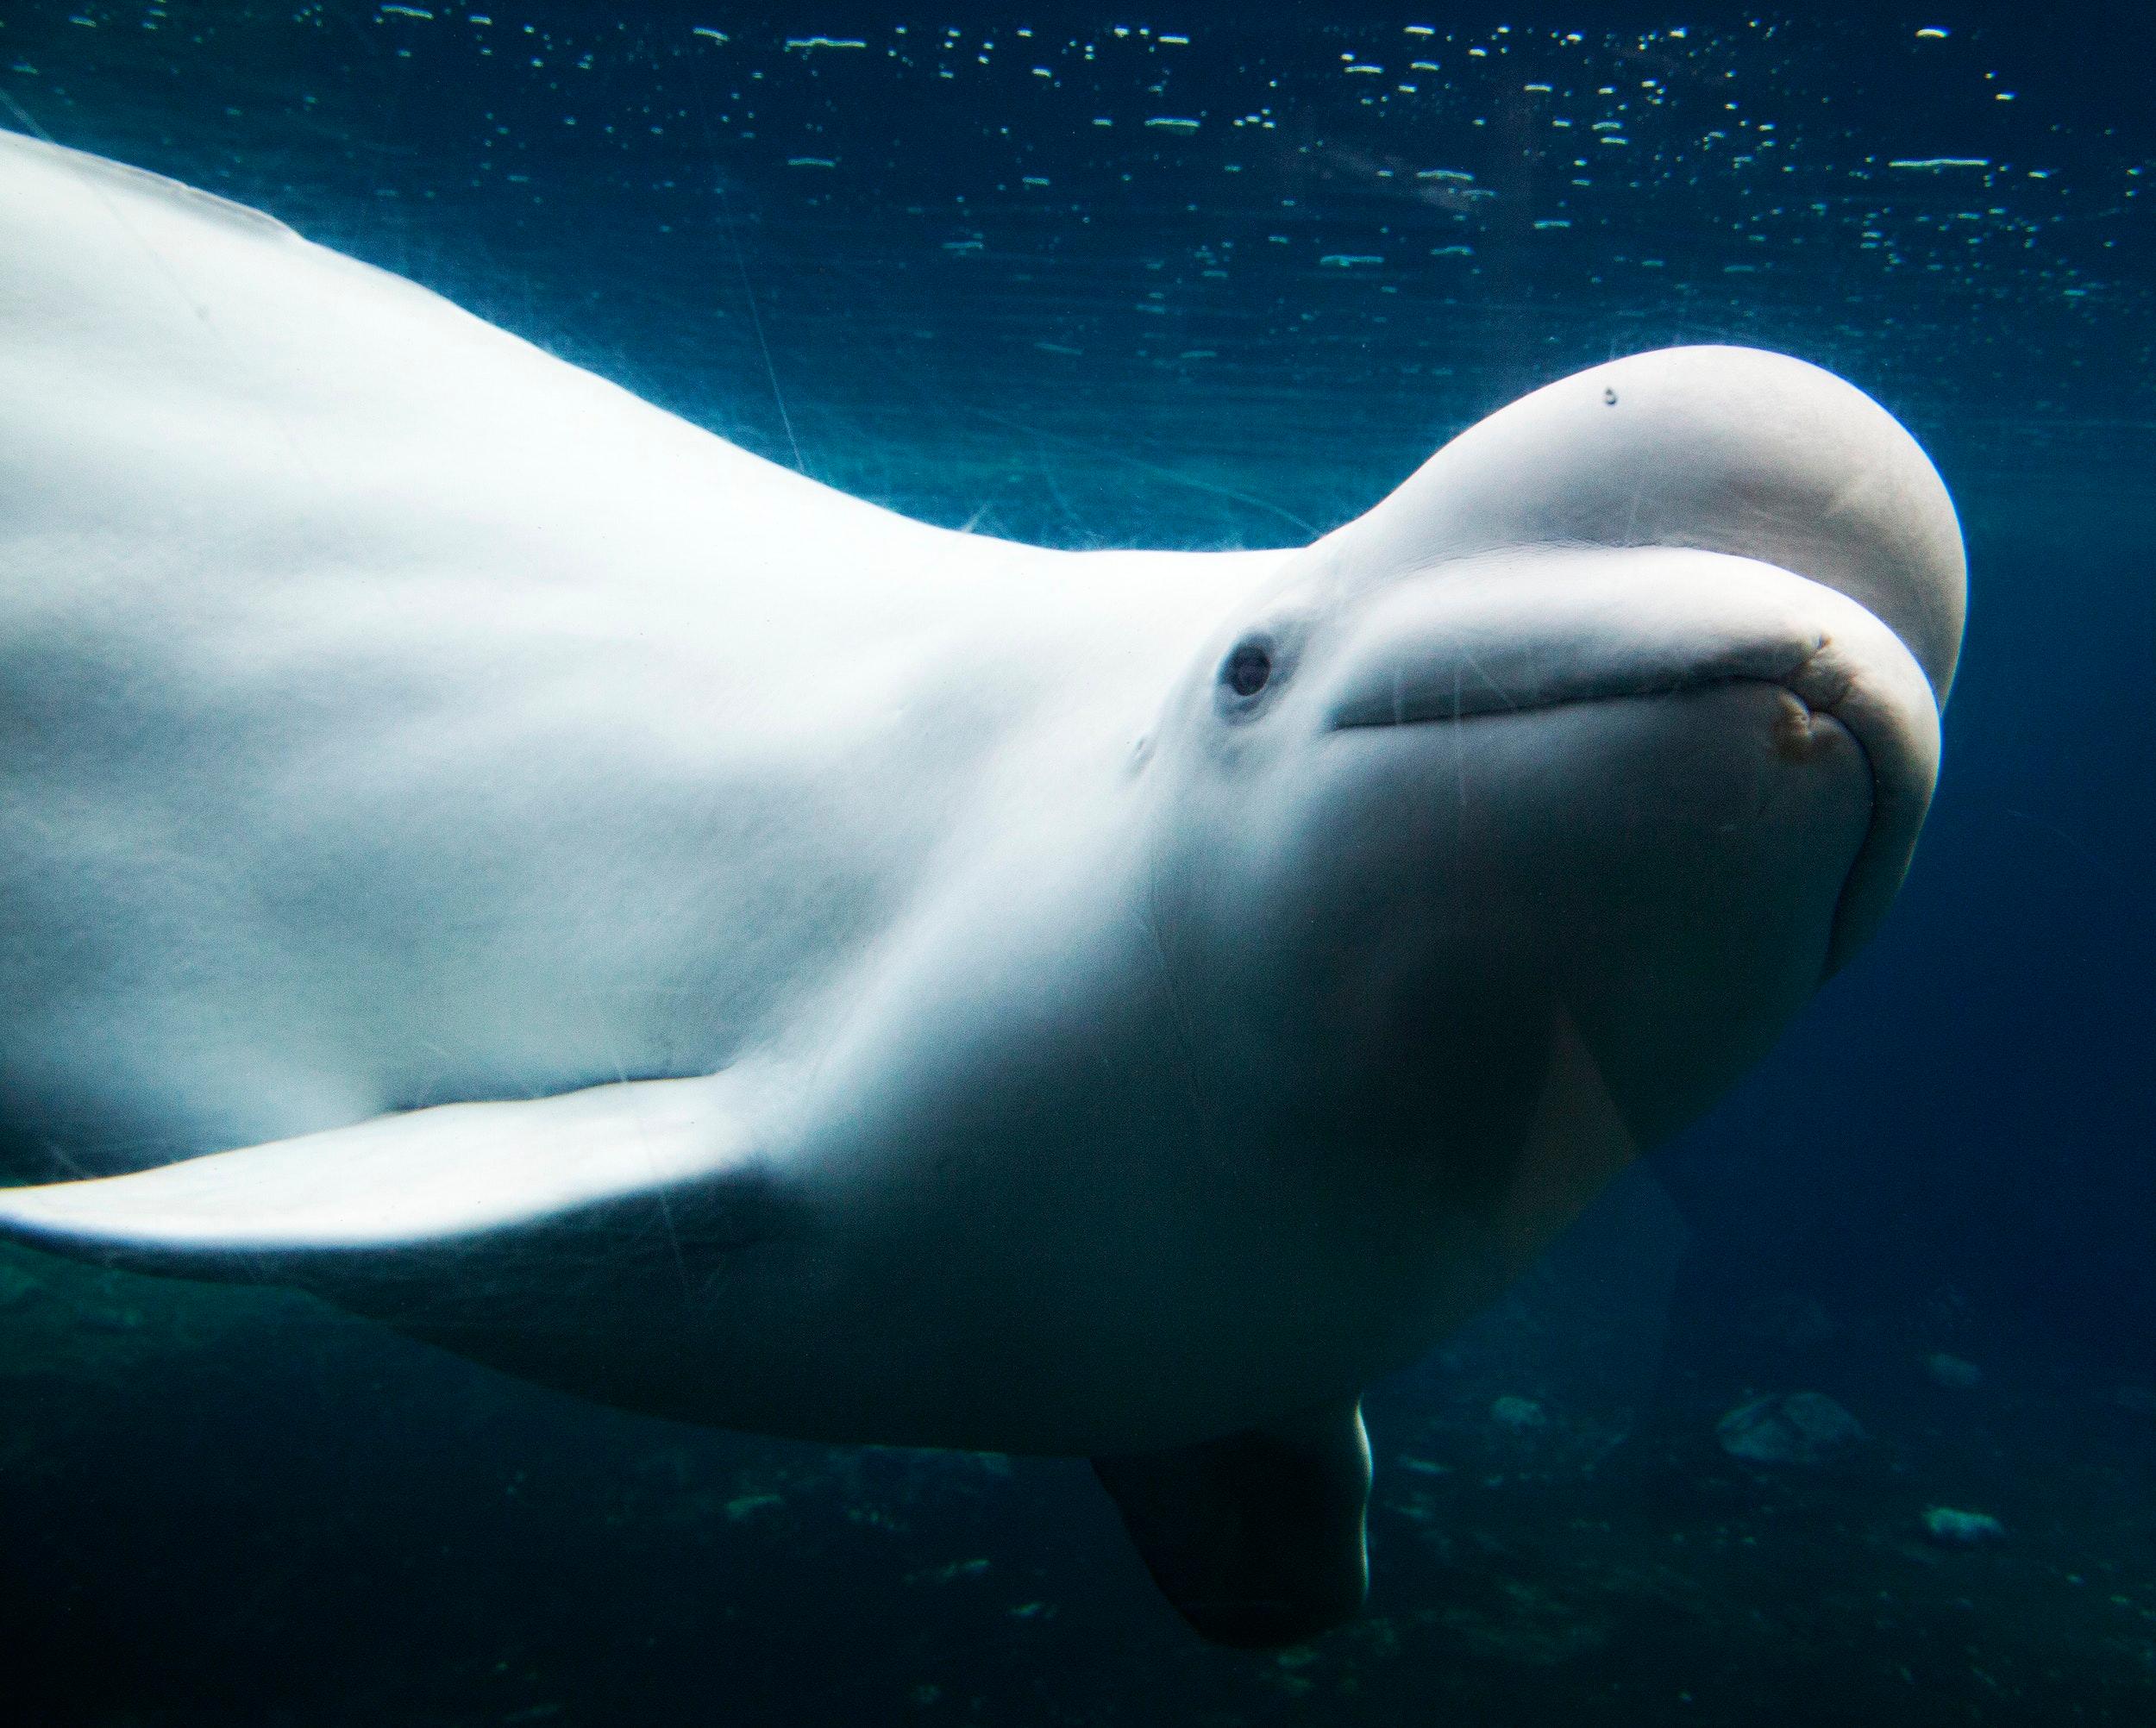 Biography of a Beluga Whale